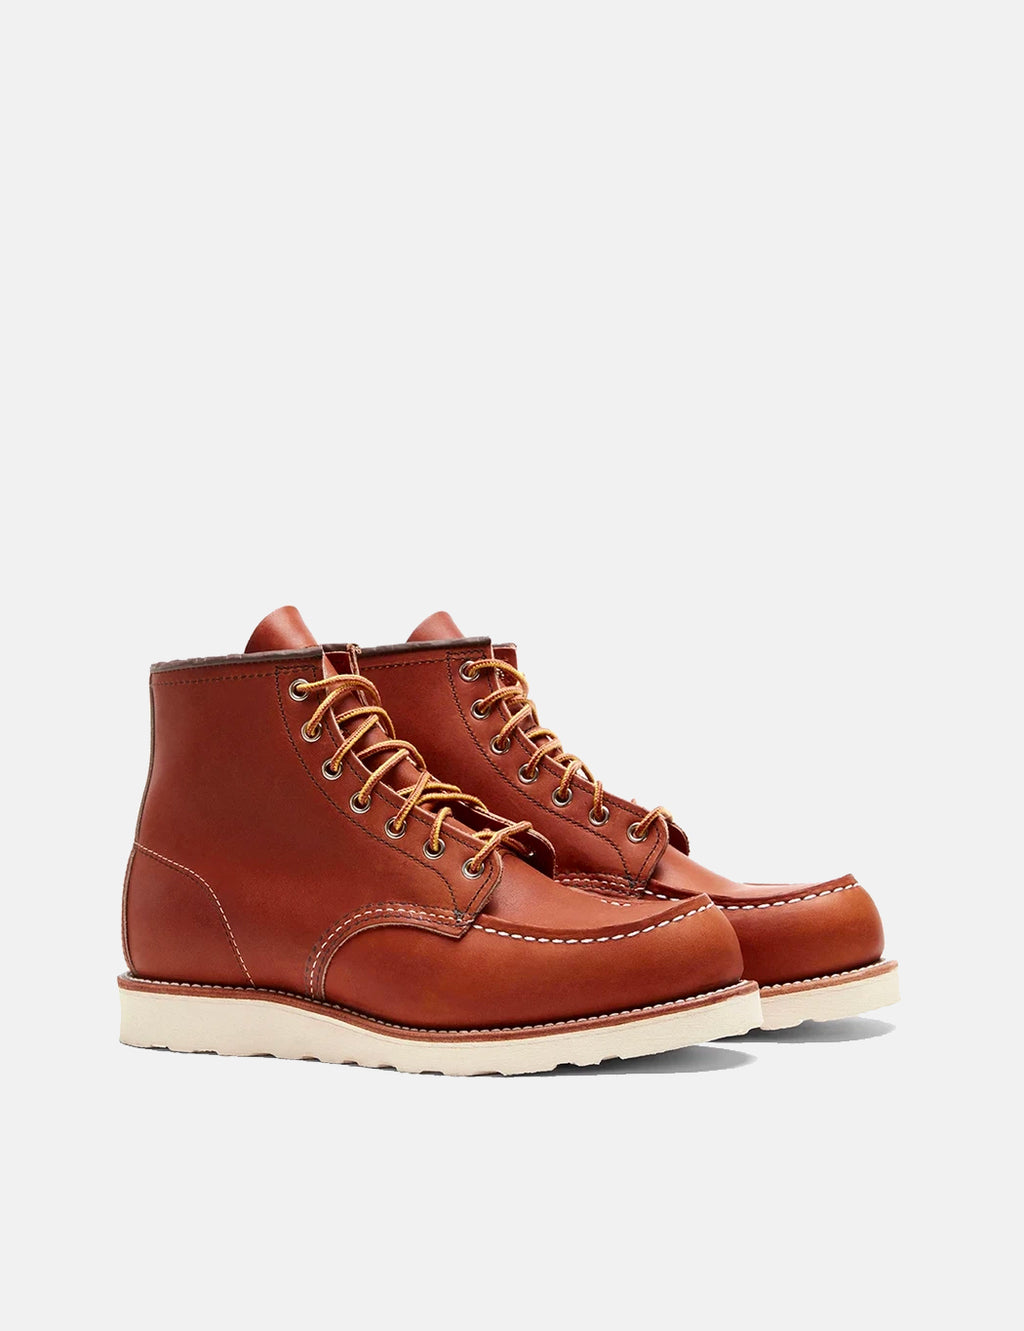 which red wing boots to buy